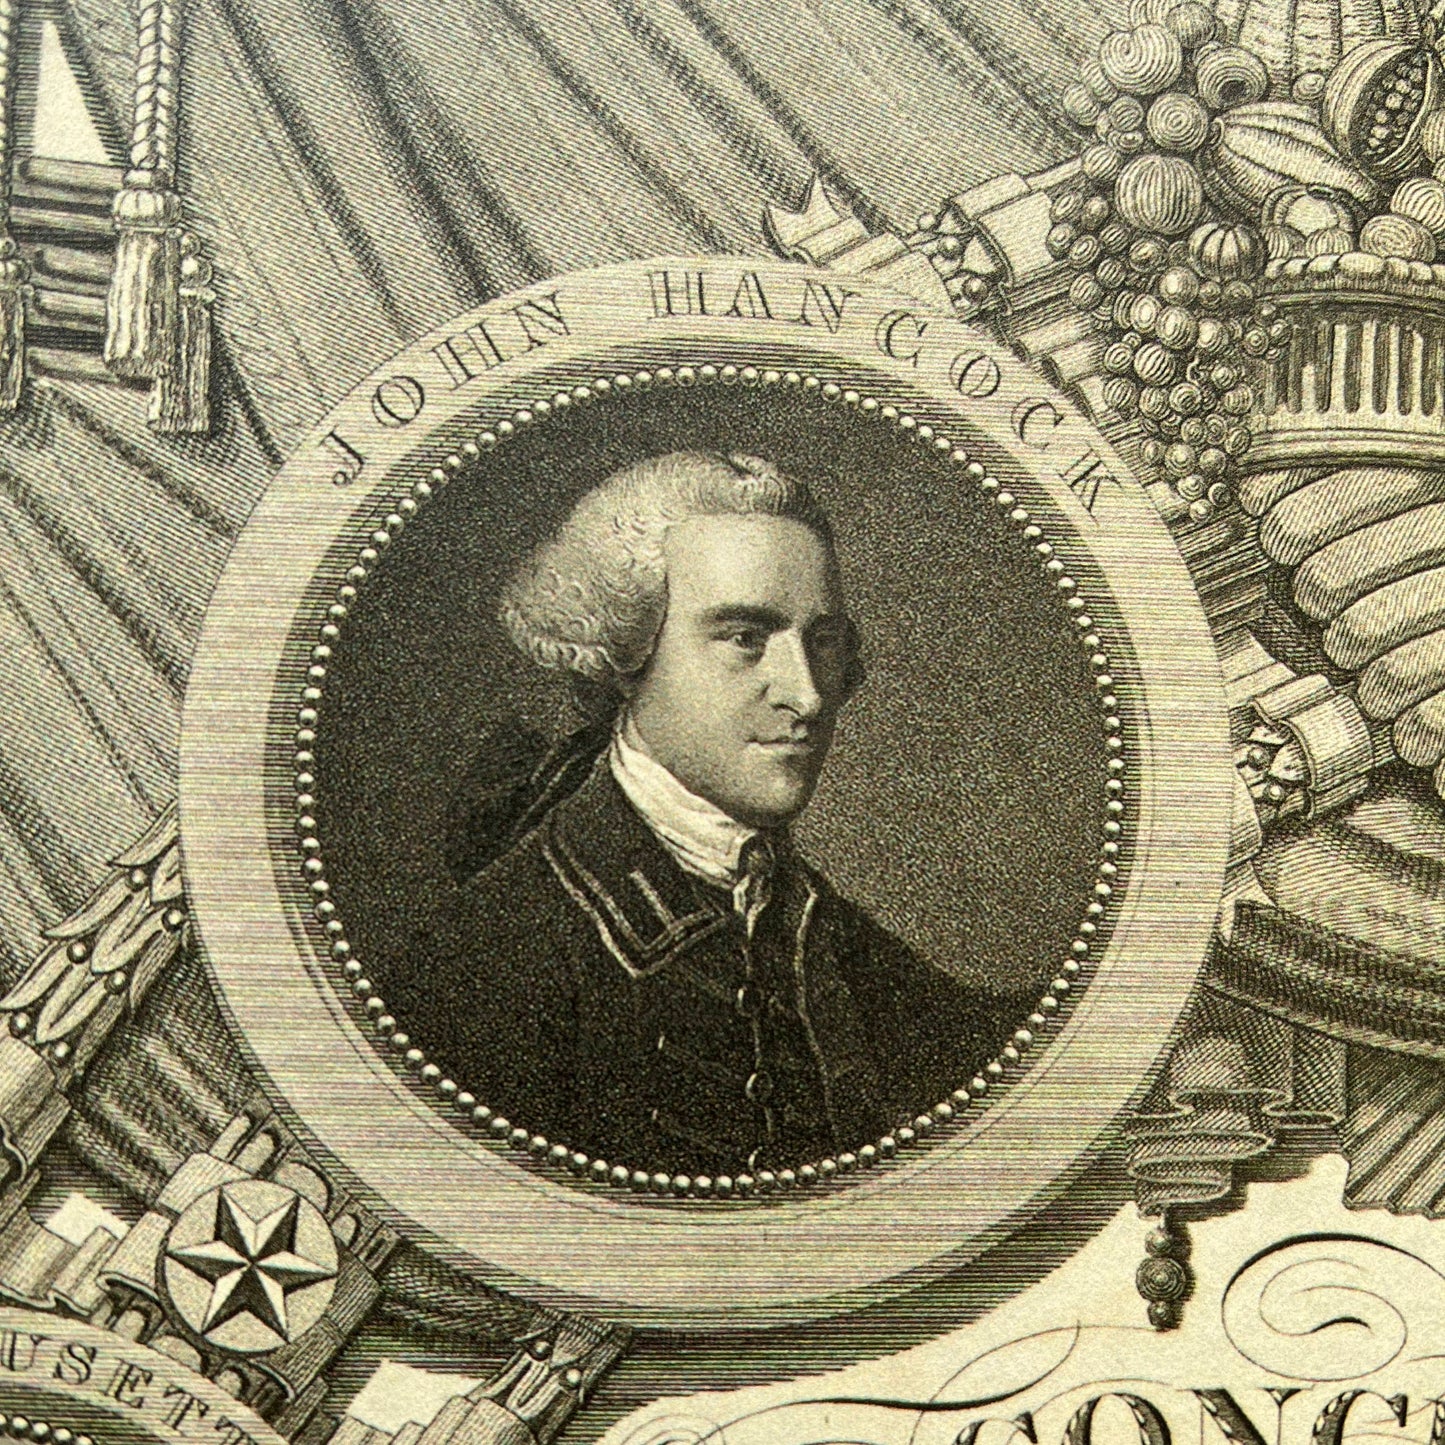 Close-up of Hancock from the Historic "Declaration of Independence" engraving by publisher John Binns Archival print from The HIstory List store